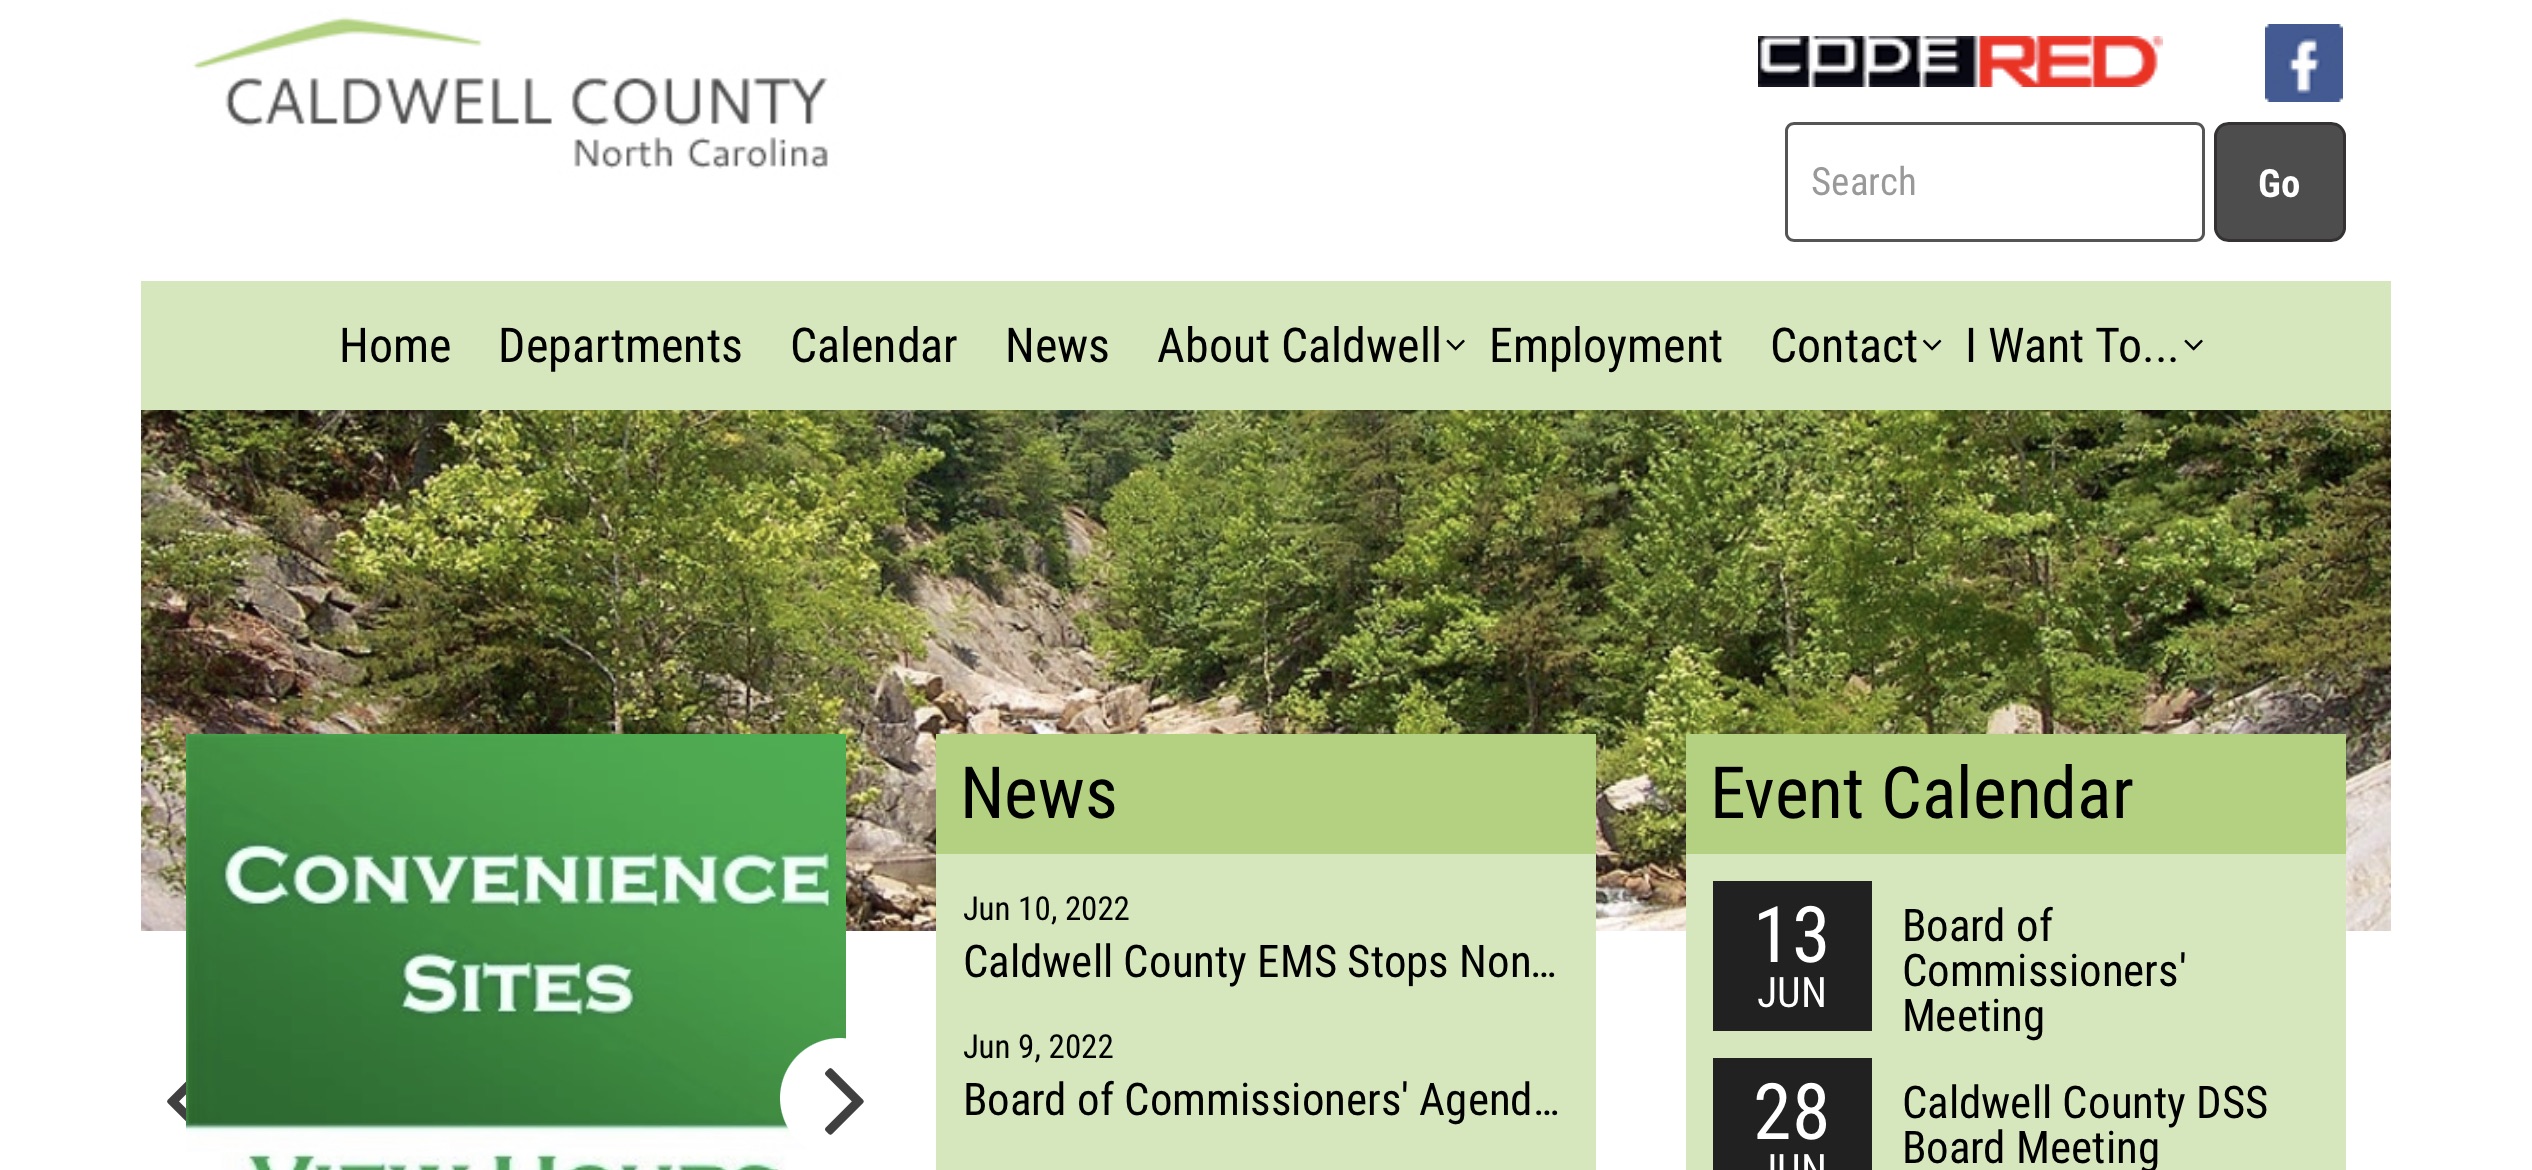 The link to sign up for Code RED, an emergency alert system, is located on the homepage for Caldwell County.